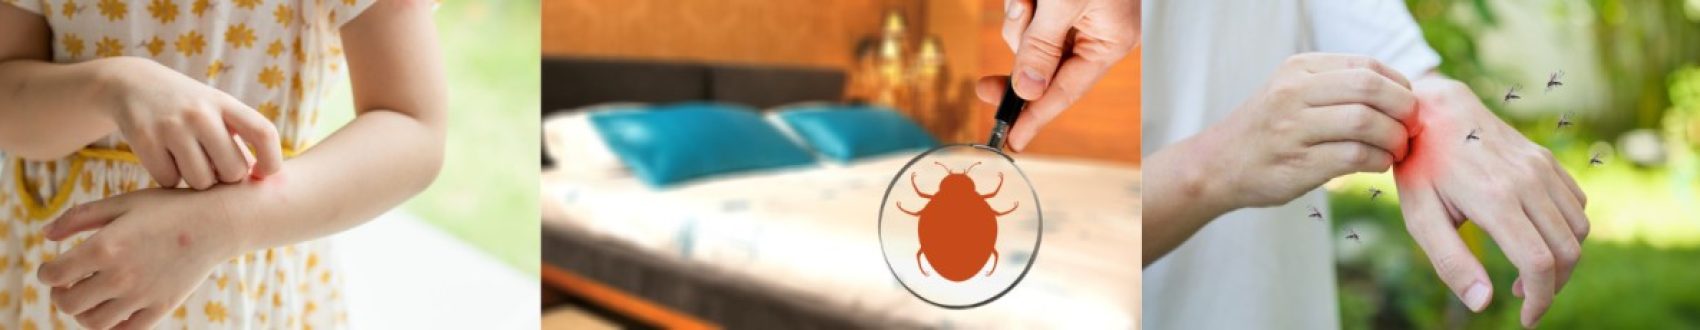 The Dangers of Bed Bugs Health Risks and Allergies in Sharjah